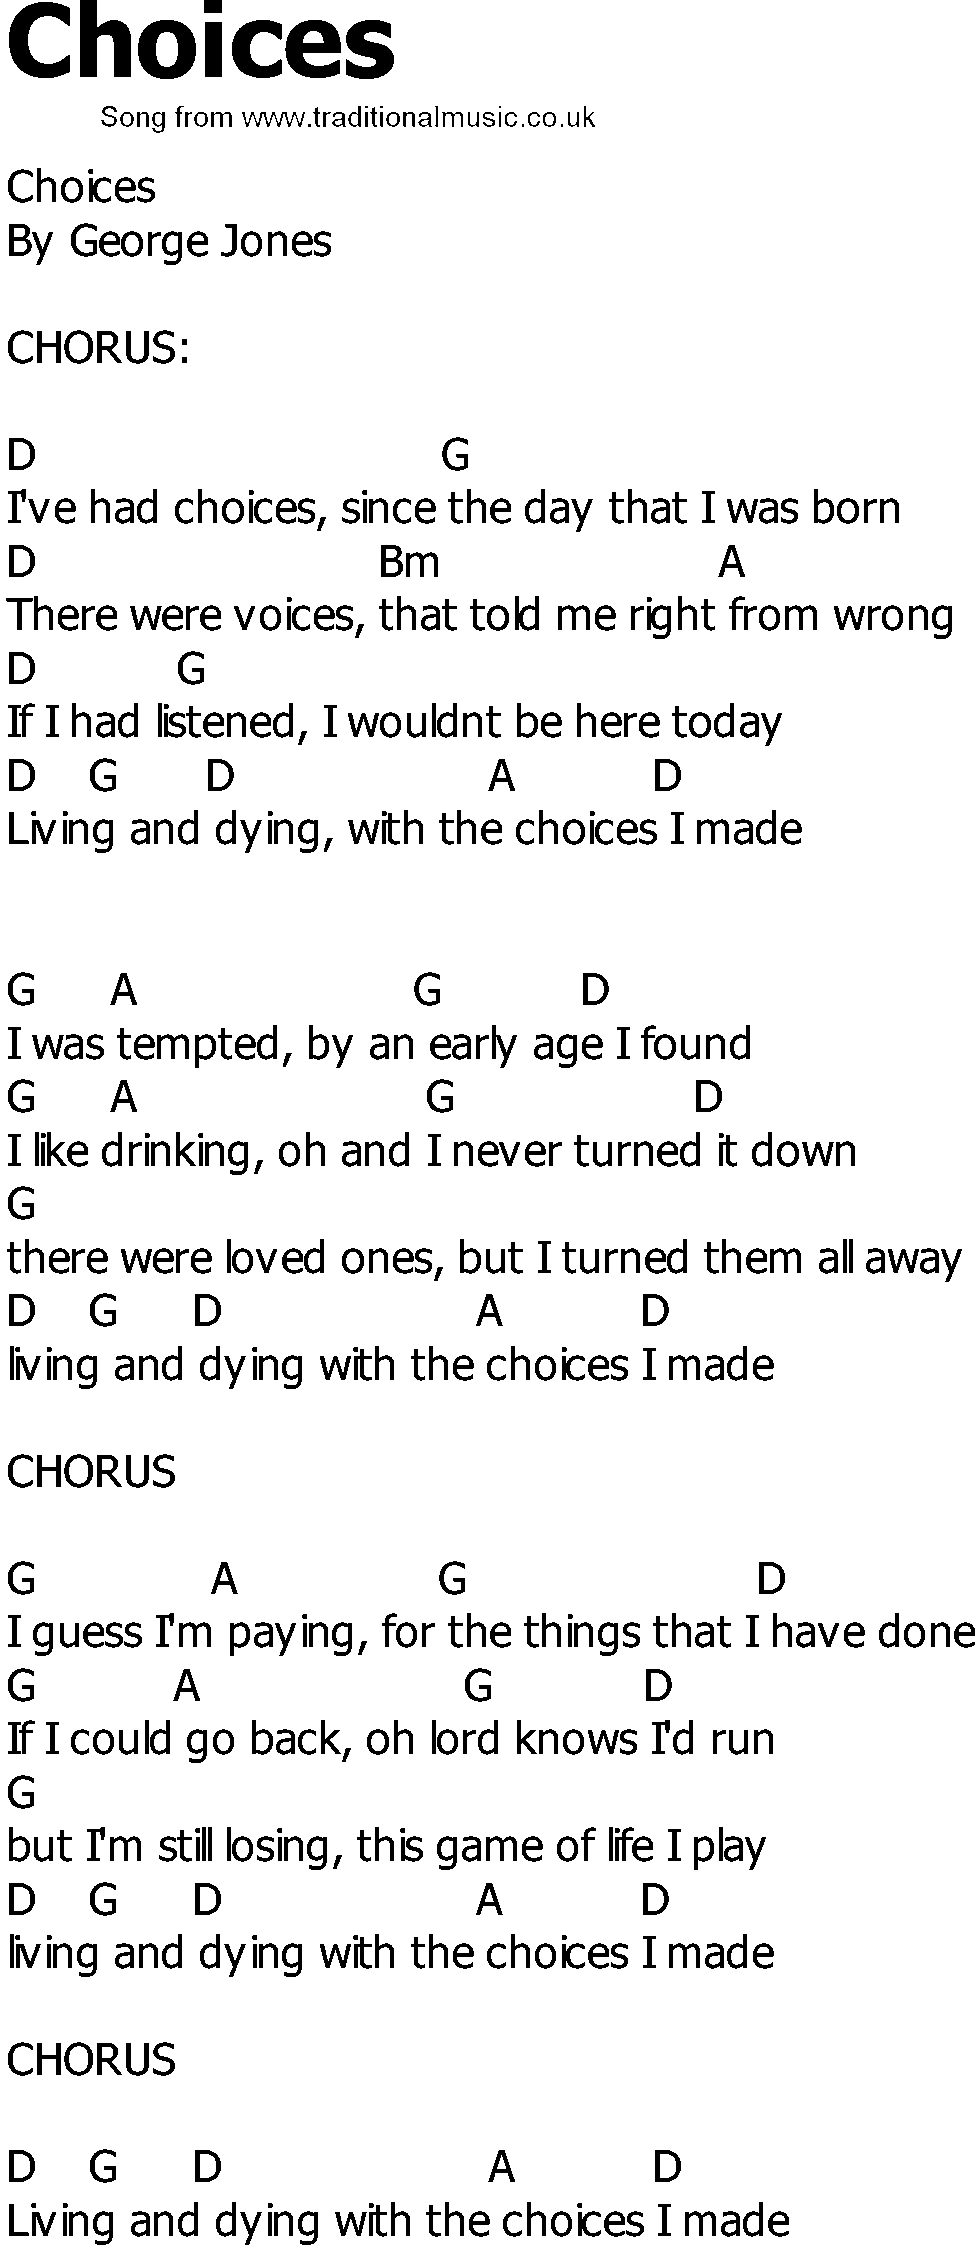 Old Country song lyrics with chords - Choices